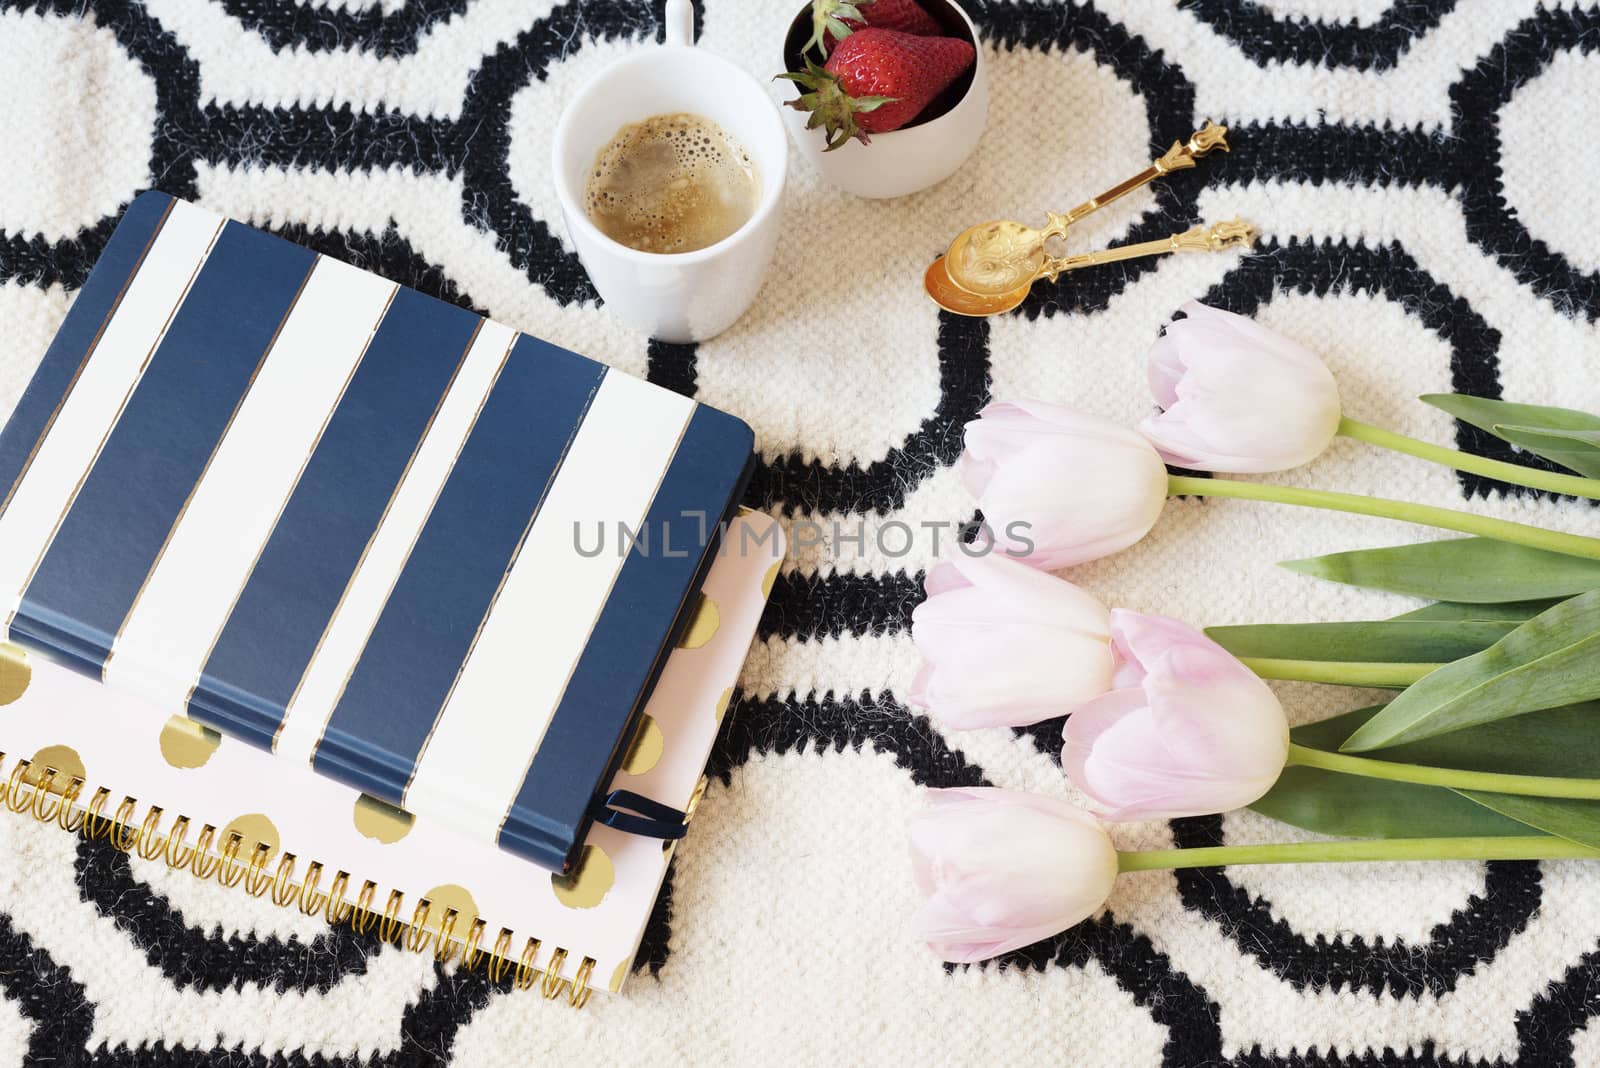 Coffee, strawberries, notebooks on Scandinavian rug. Pink Tulips and Gold Spoons. White black pattern and gold theme. Lifestyle concept